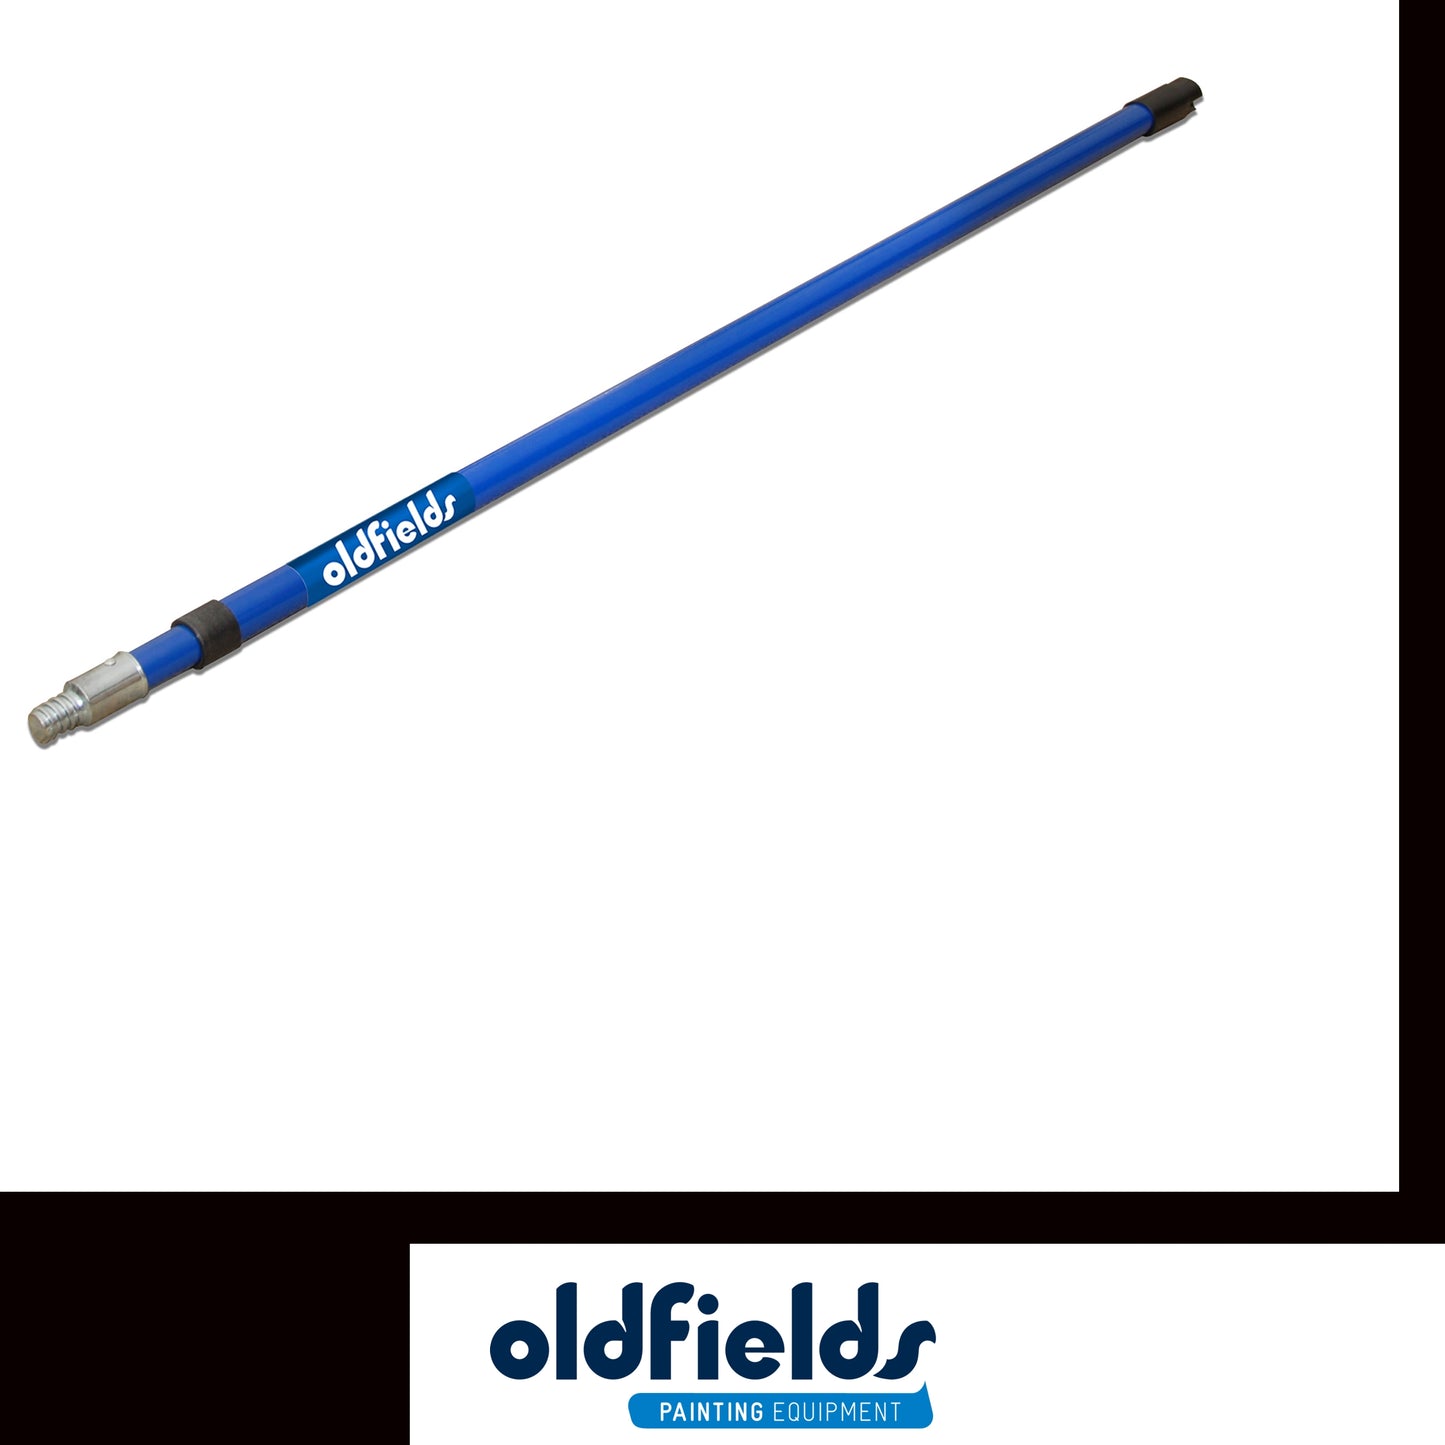 Steel paint roller Extension Pole 1.1mtr opens to 2mtr Long from Oldfields